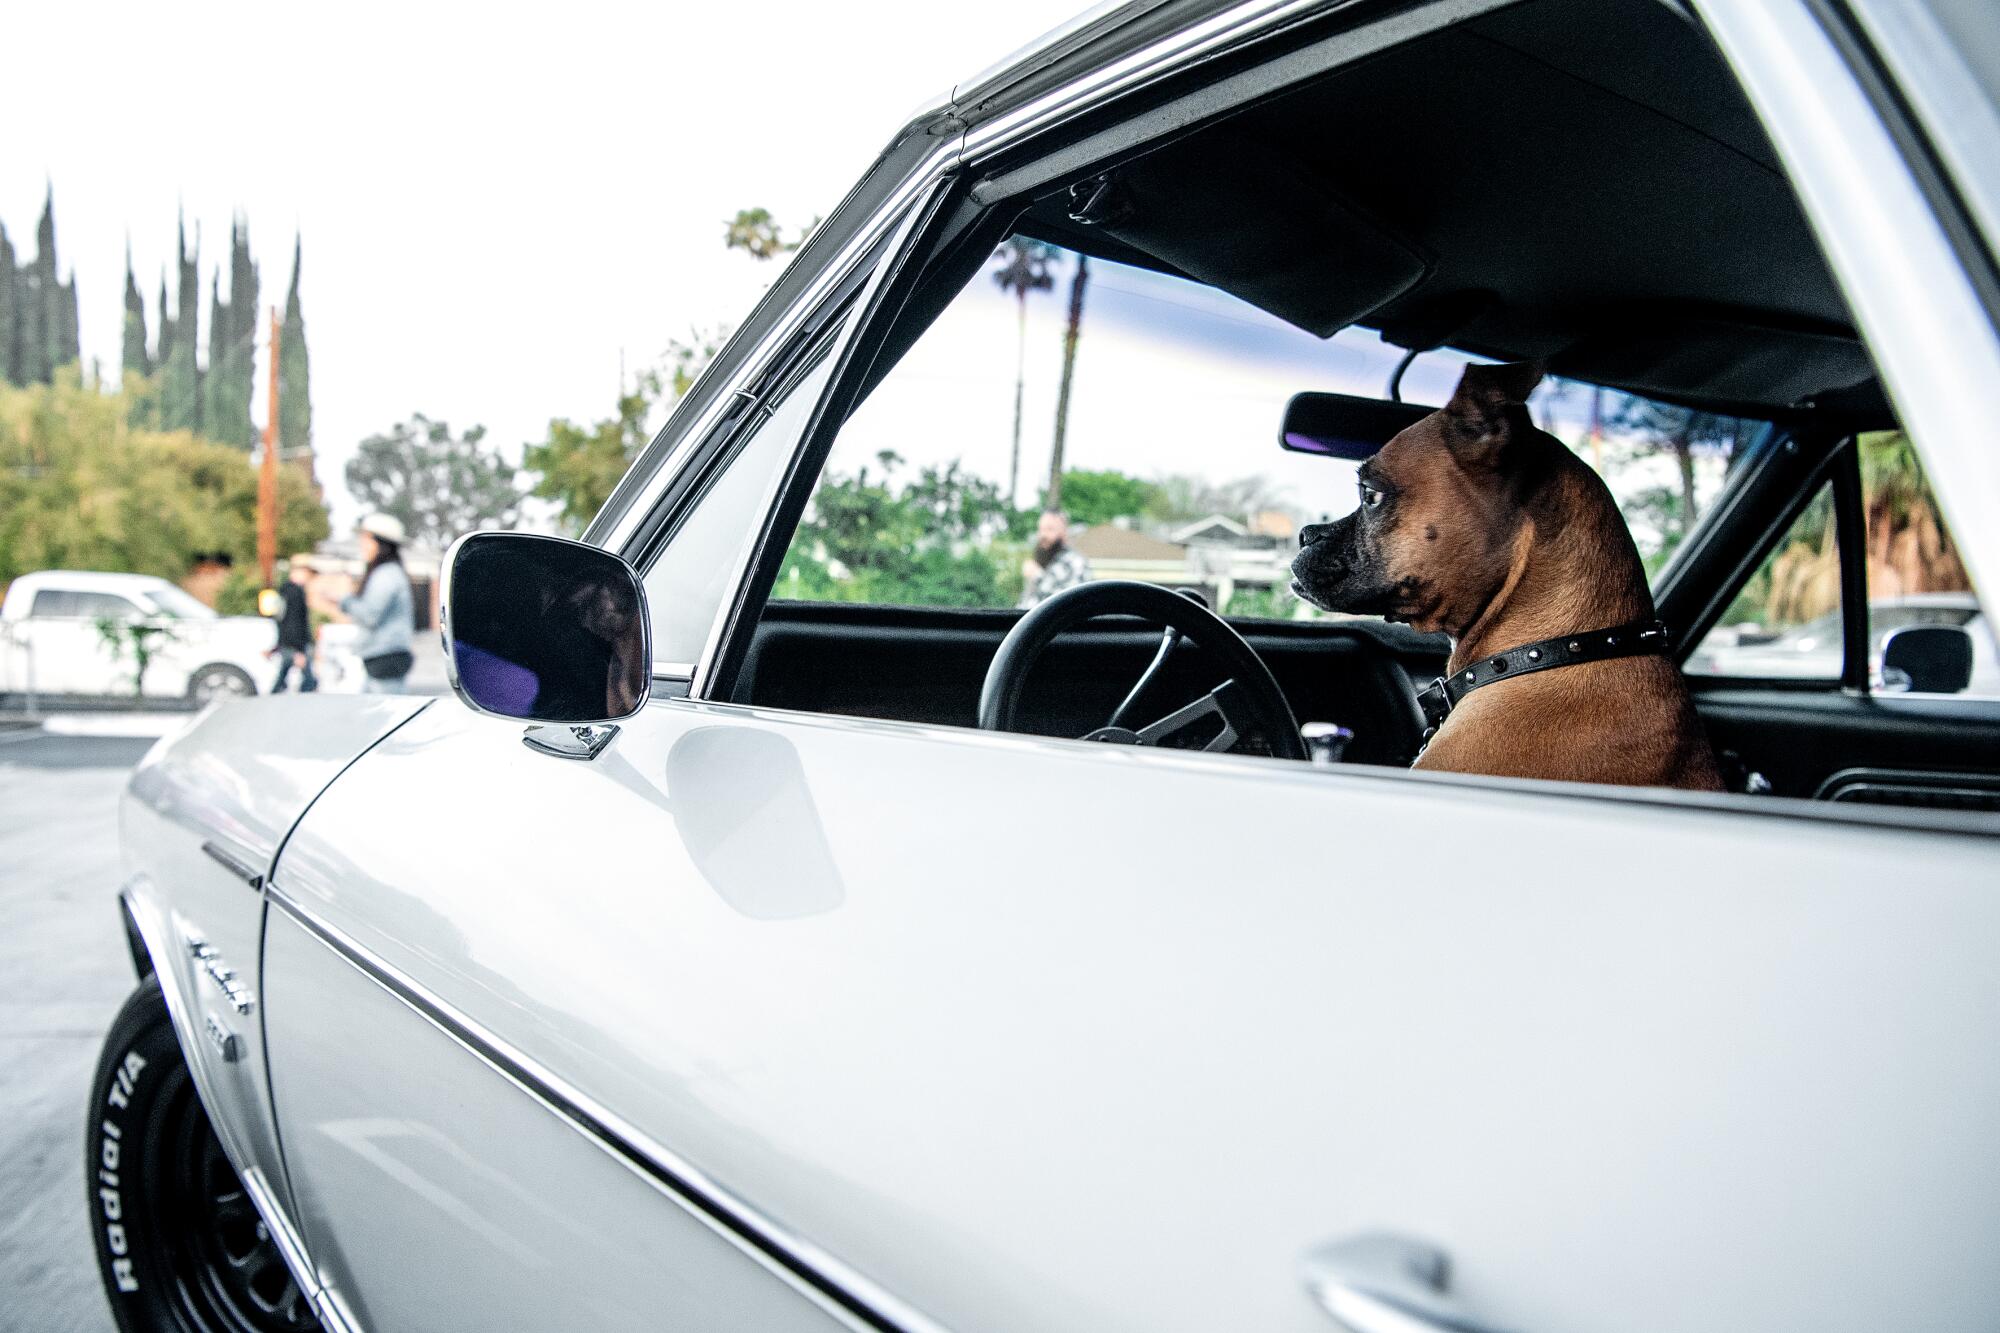 Lola the dog sits in the front seat of a 1972 Chevy El Camino.